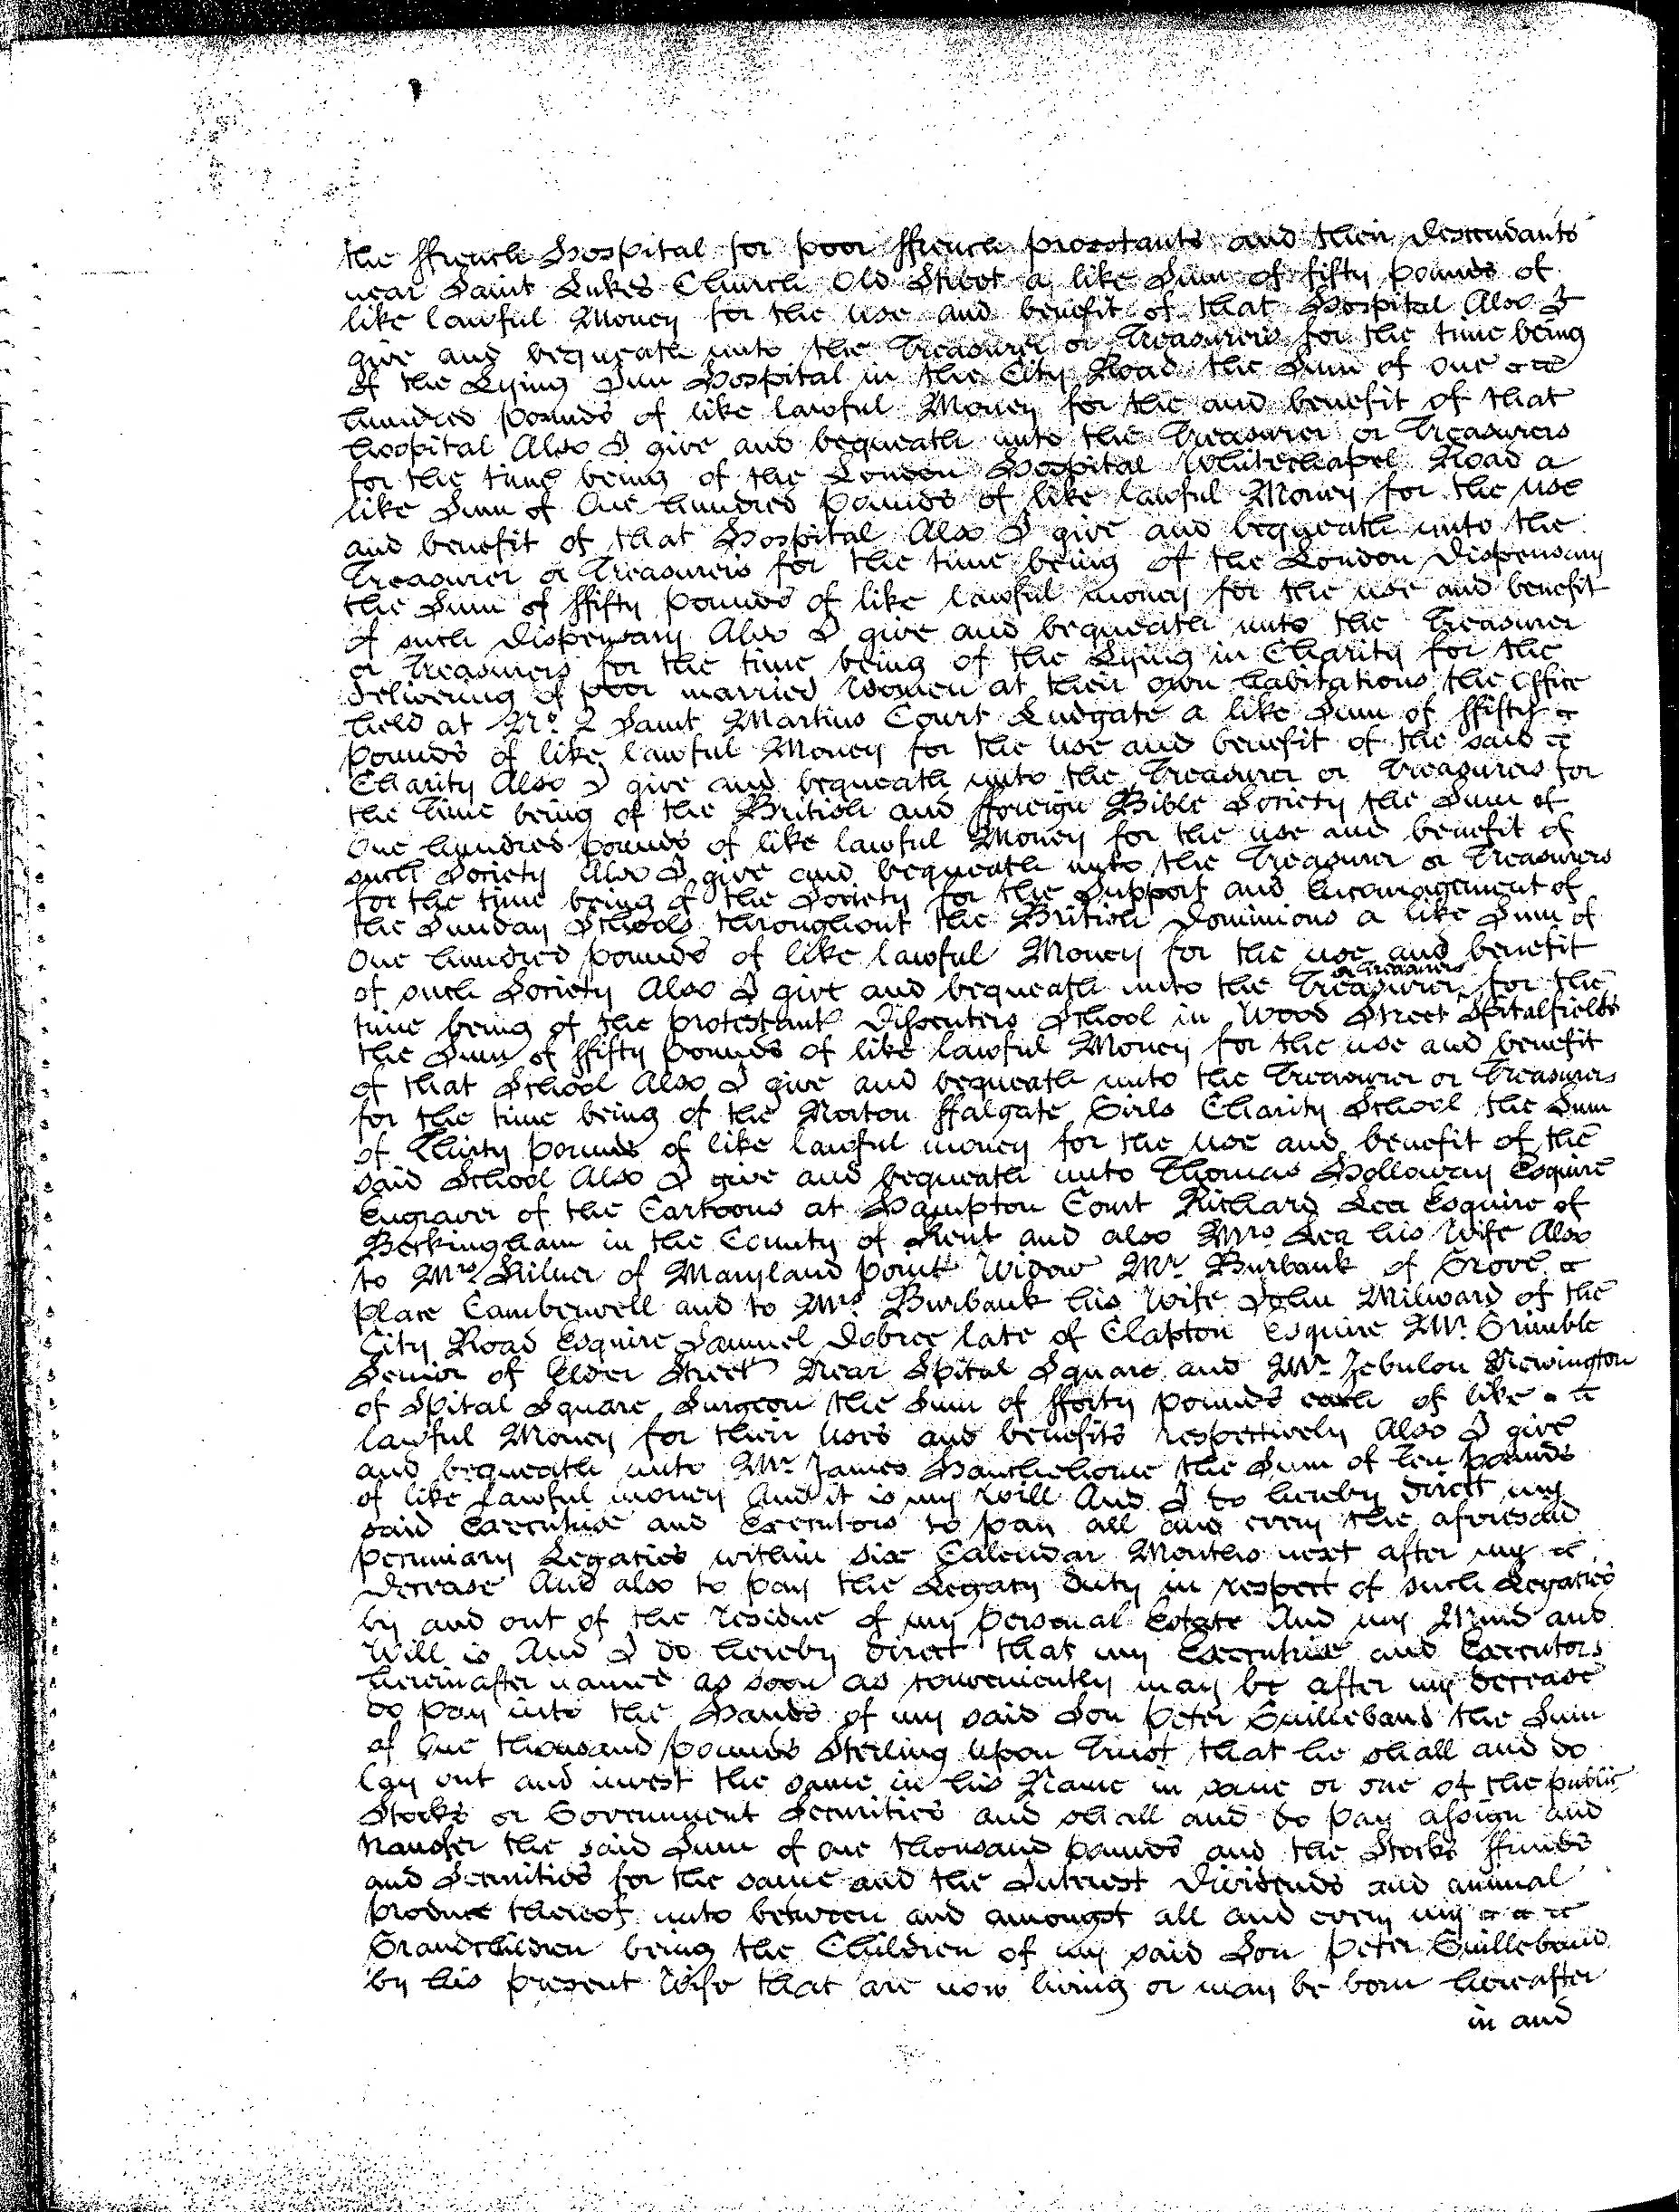 Peter Guillebaud’s will of 1821, page 3